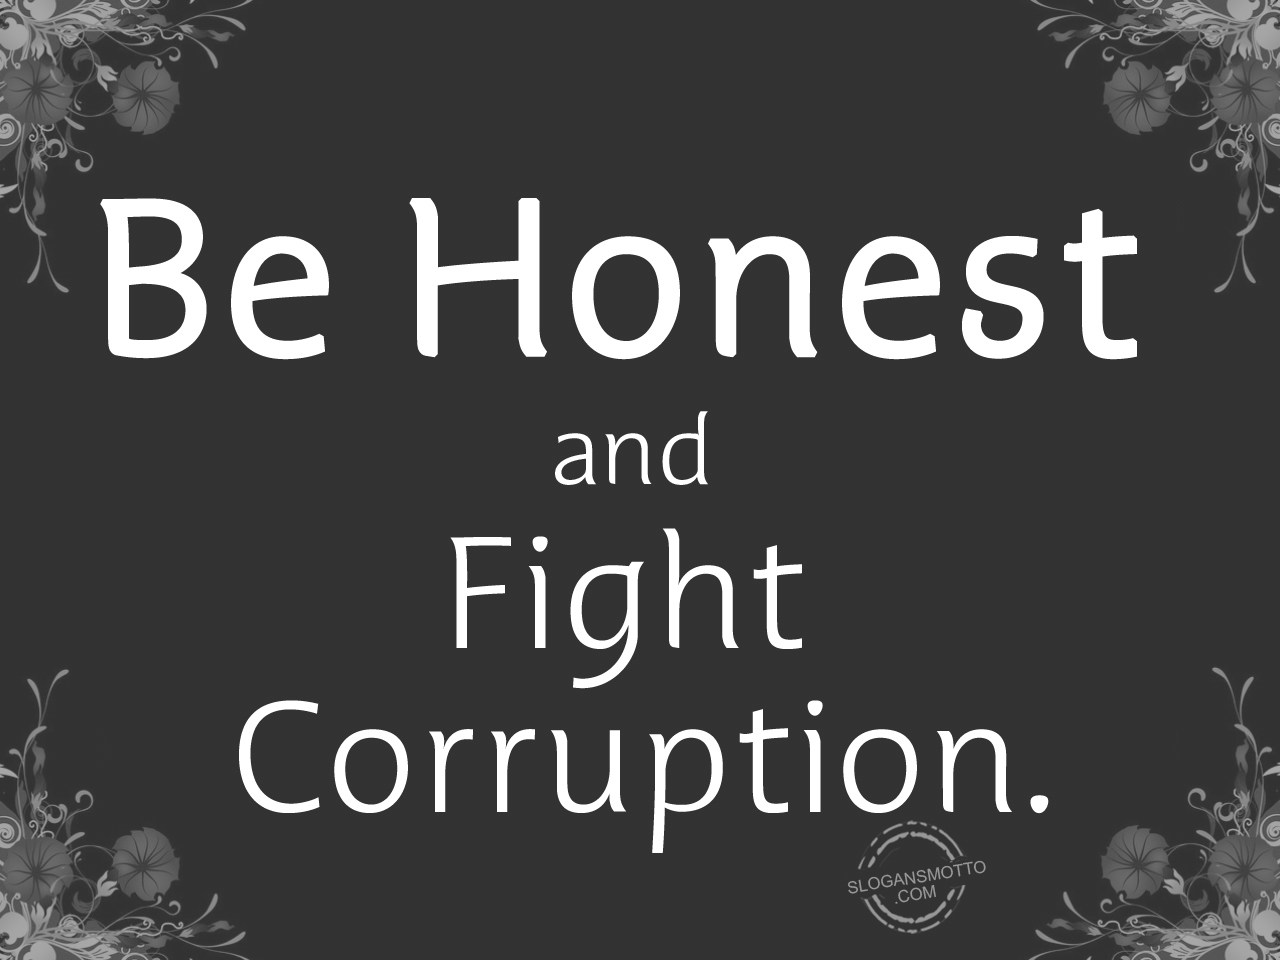 Be honest and fight corruption. 